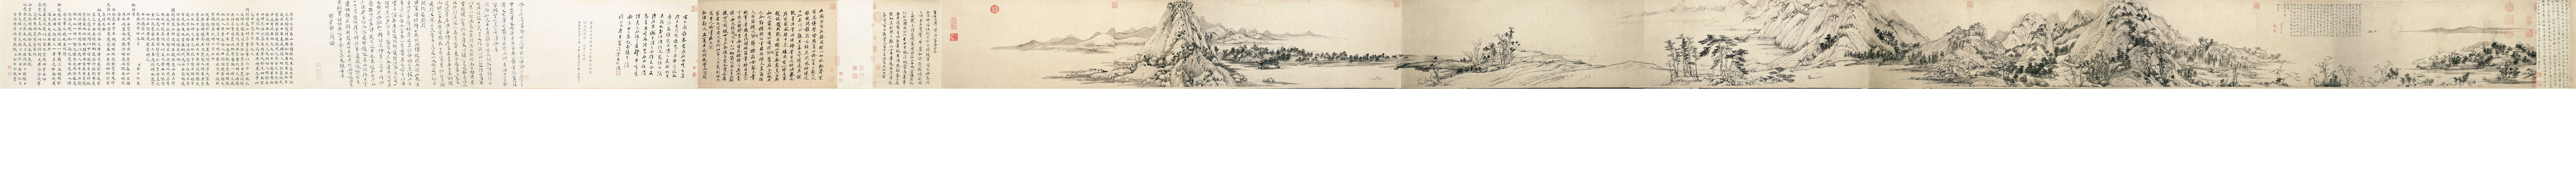 “The Master Wuyong Scroll” (second part of the scroll), Huang Gongwang, Dwelling in the Fuchun Mountains, 1350, handscroll, ink on paper, 33 x 636.9 cm (National Palace Museum, Taipei)